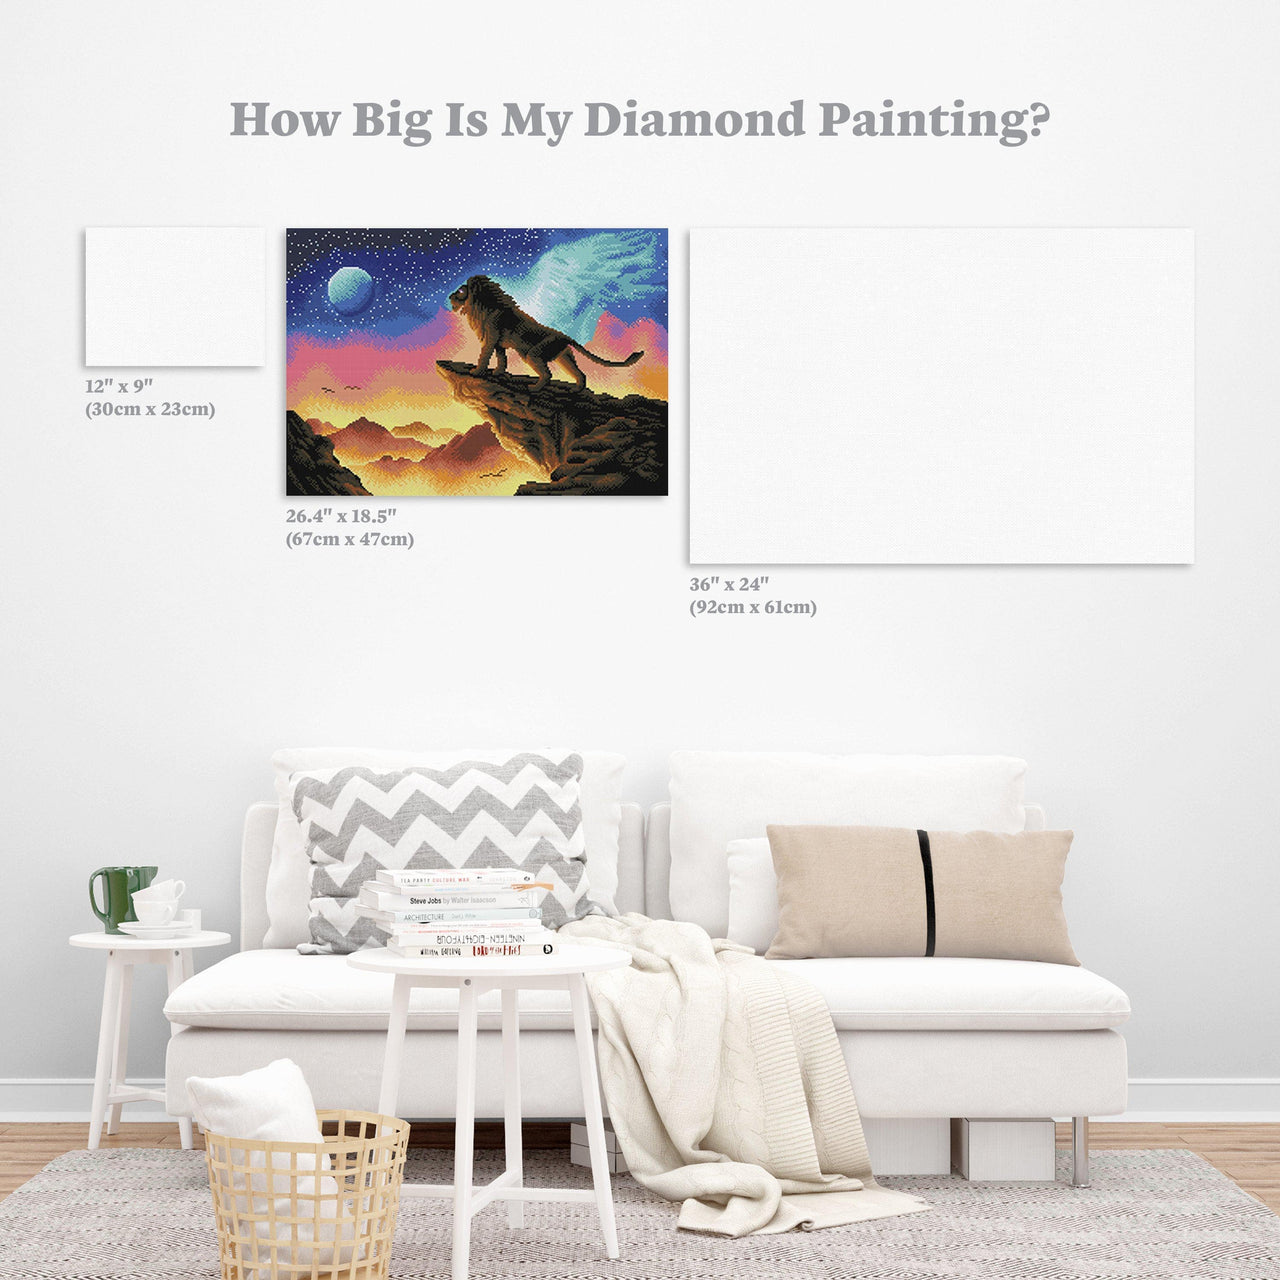 Diamond Painting Free Like a Bird 18.5" x 26.4" (47cm x 67cm) / Round With 29 Colors Including 1 AB / 39,342